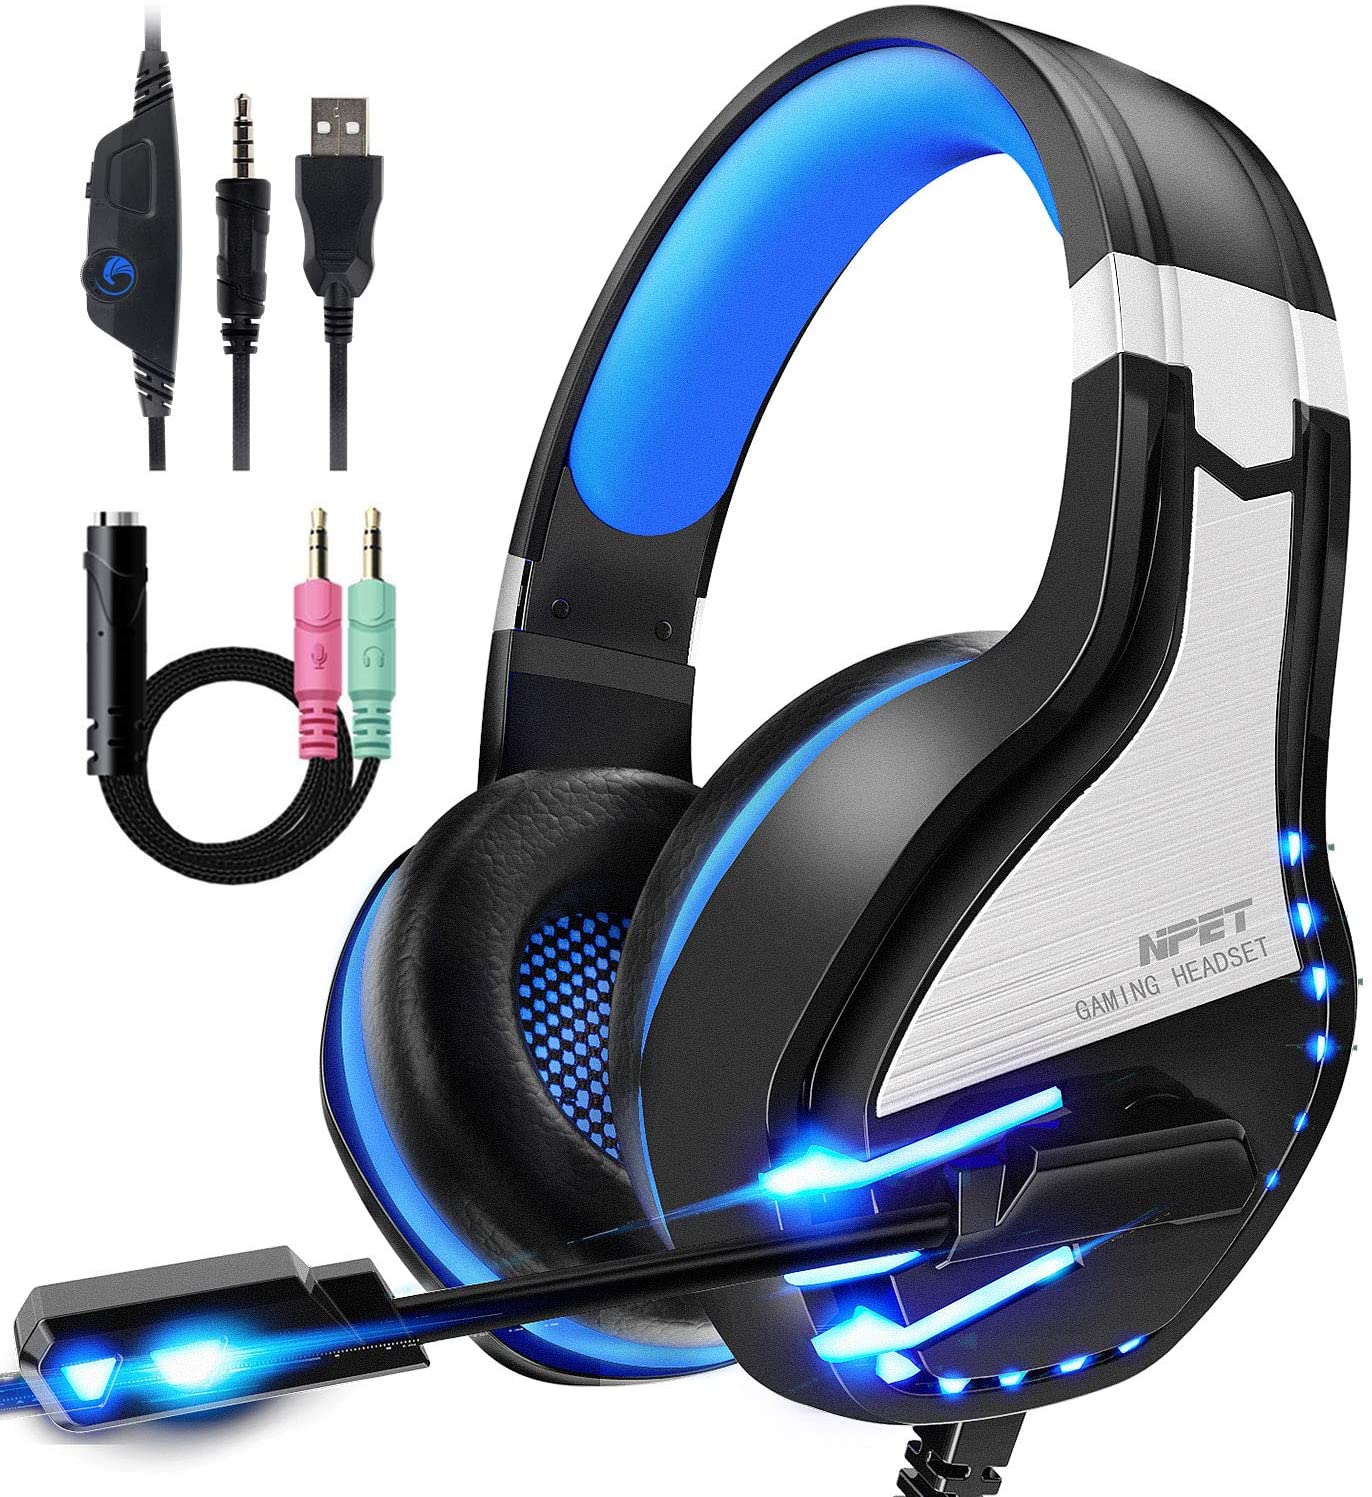 HS10 Stereo Gaming Headset for PS4, PC, Xbox One $13.99